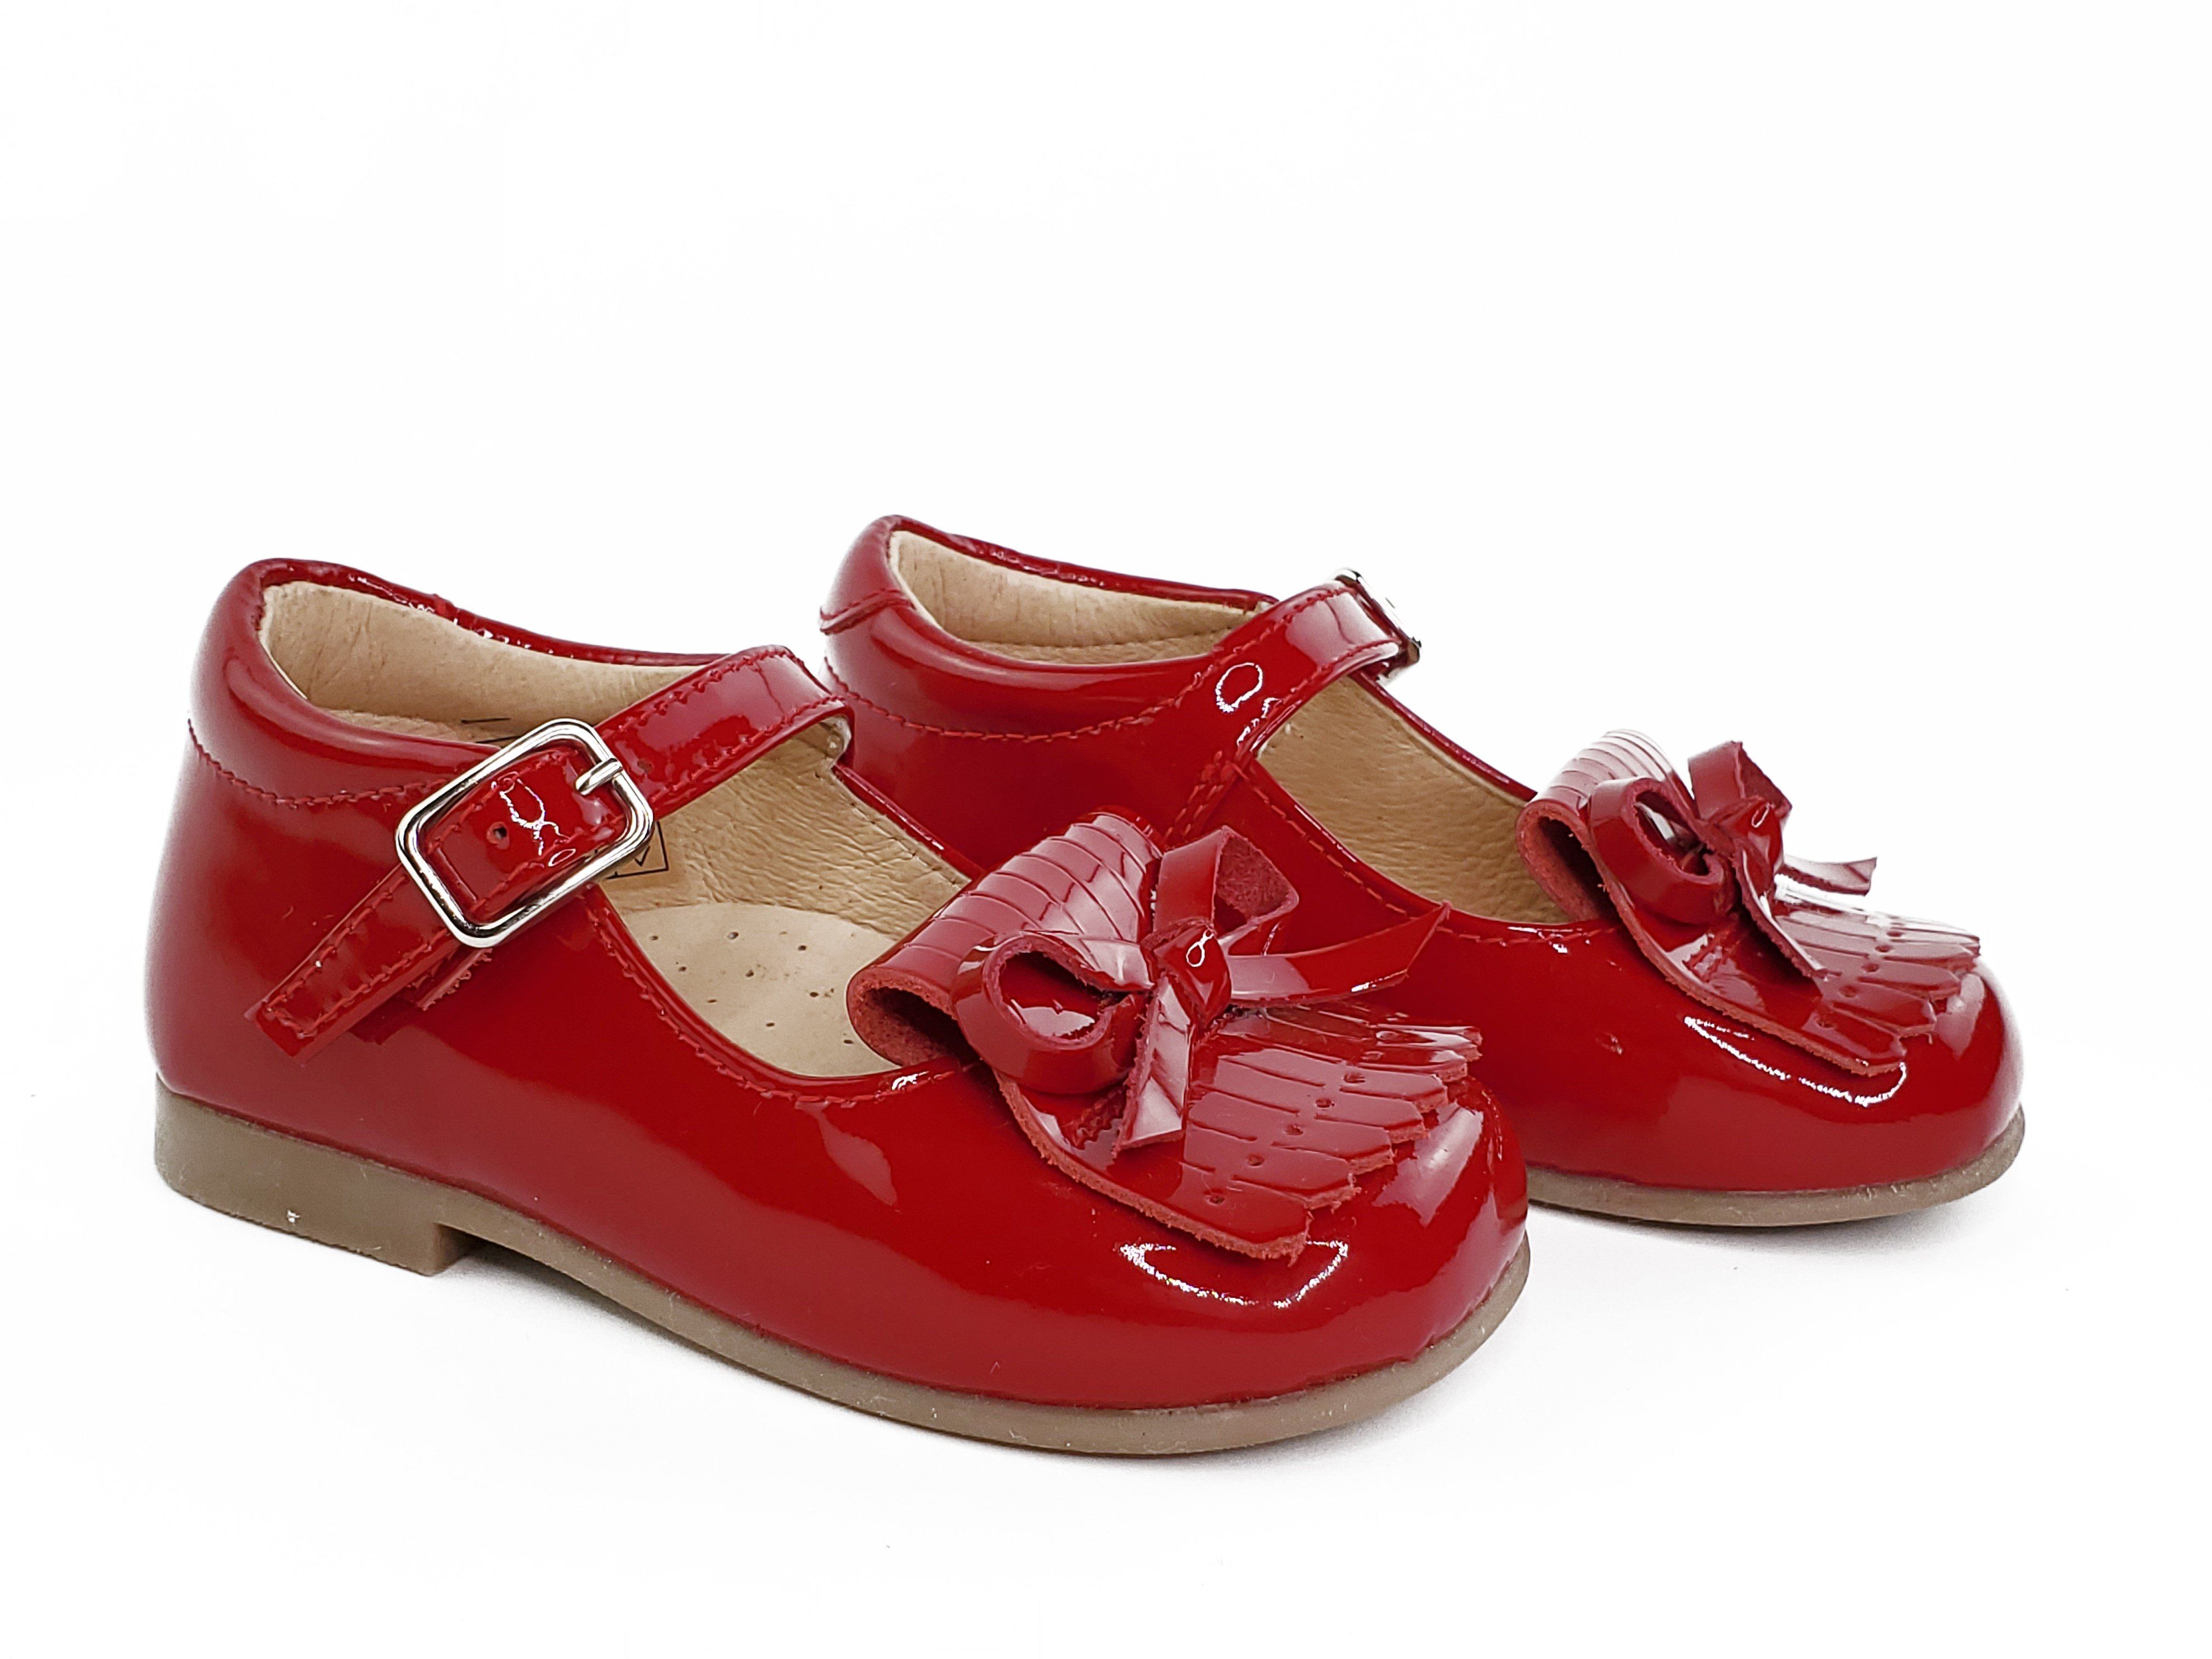 Venus Red Patent Kilted Mary Janes Shoes-Toddler Girl Shoes Girls Shoes Alfa Baby Boutique 5 Red Female-Right Side View